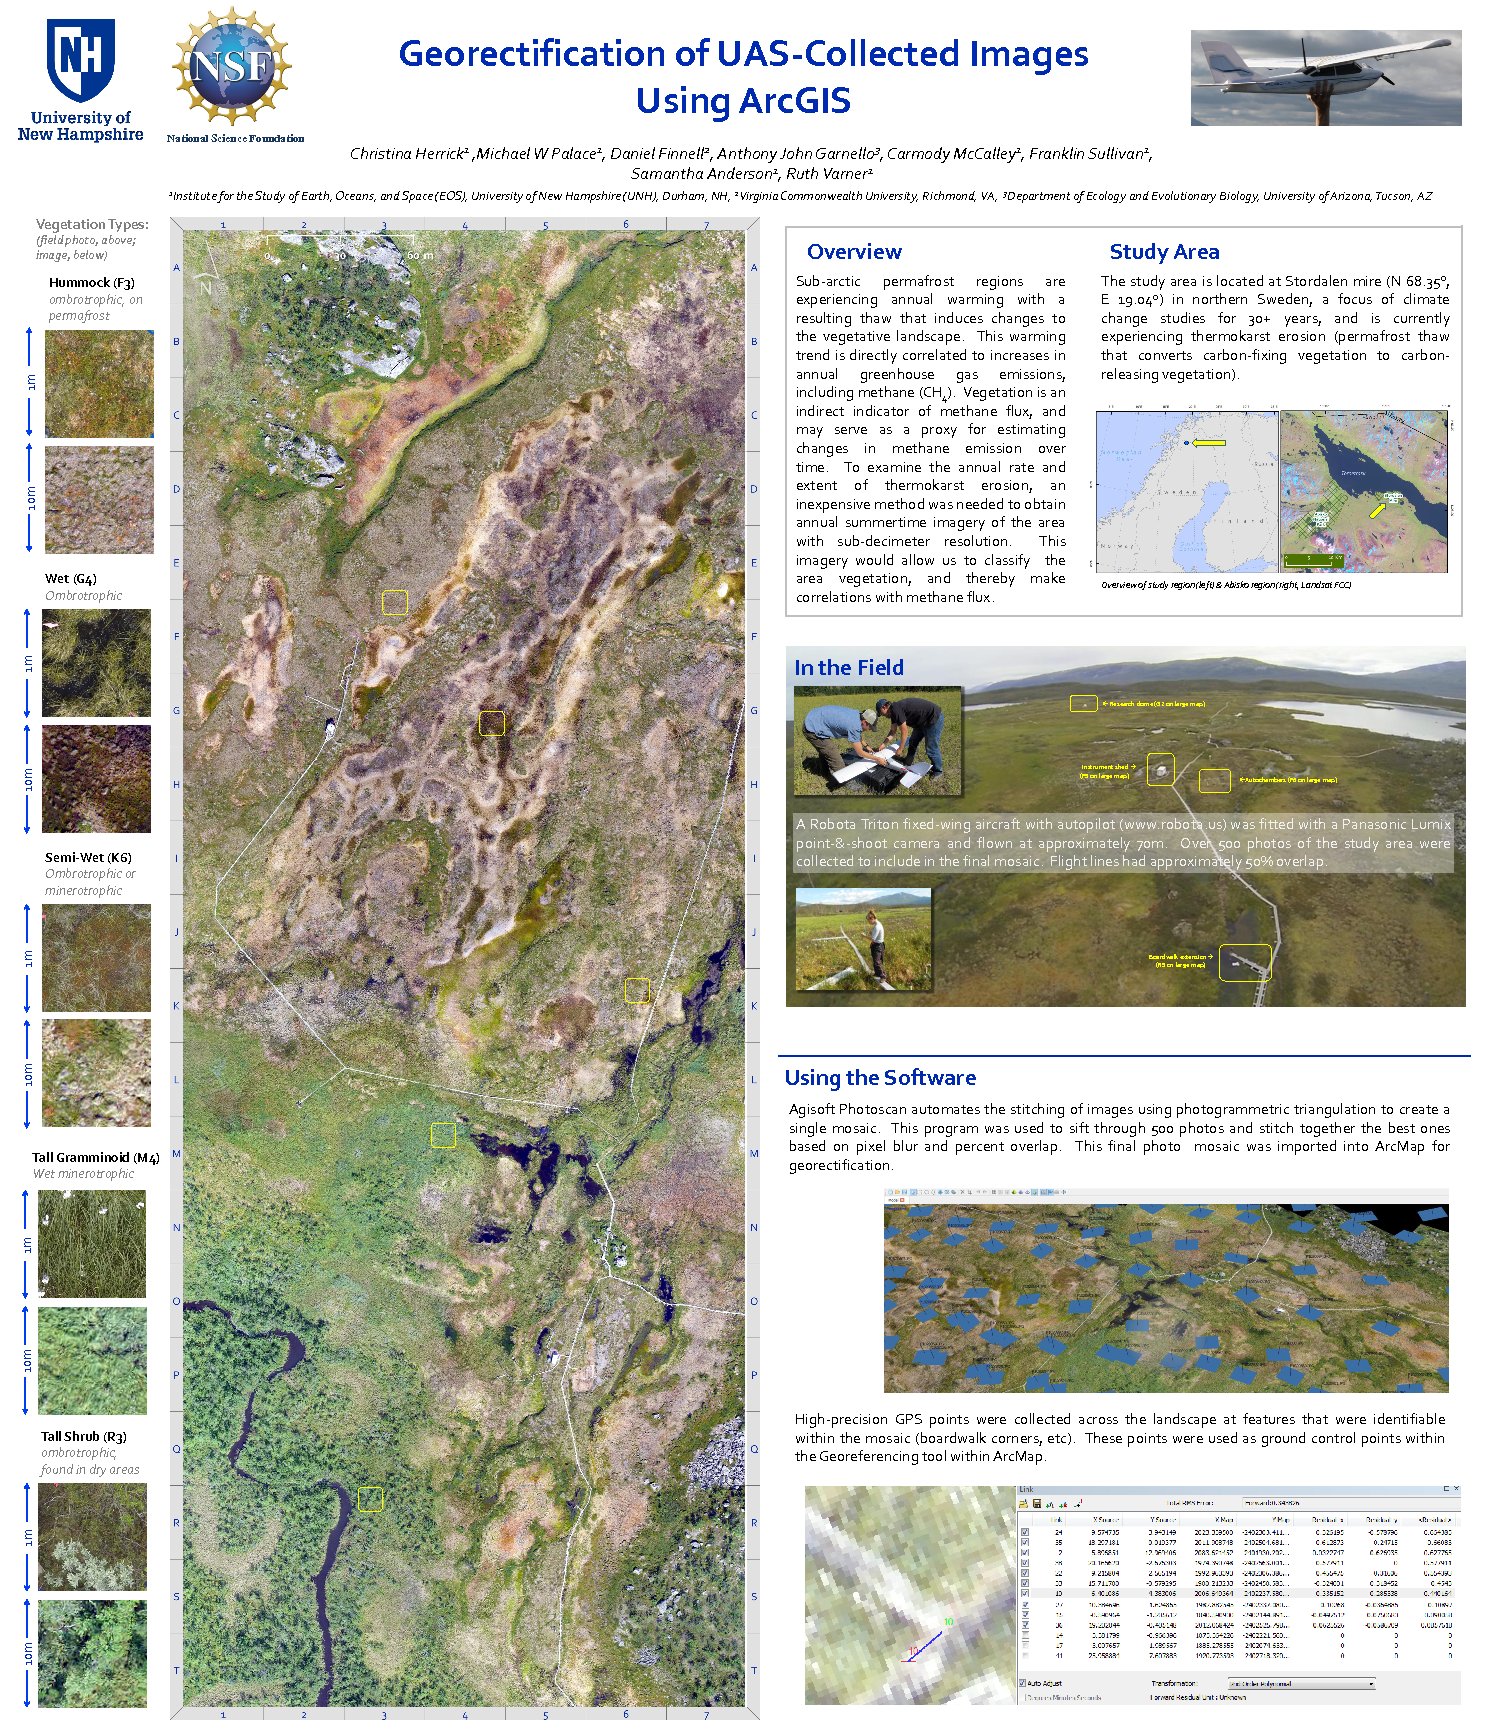 Georectification Of Uas-Collected Images Using Arcgis by herrick